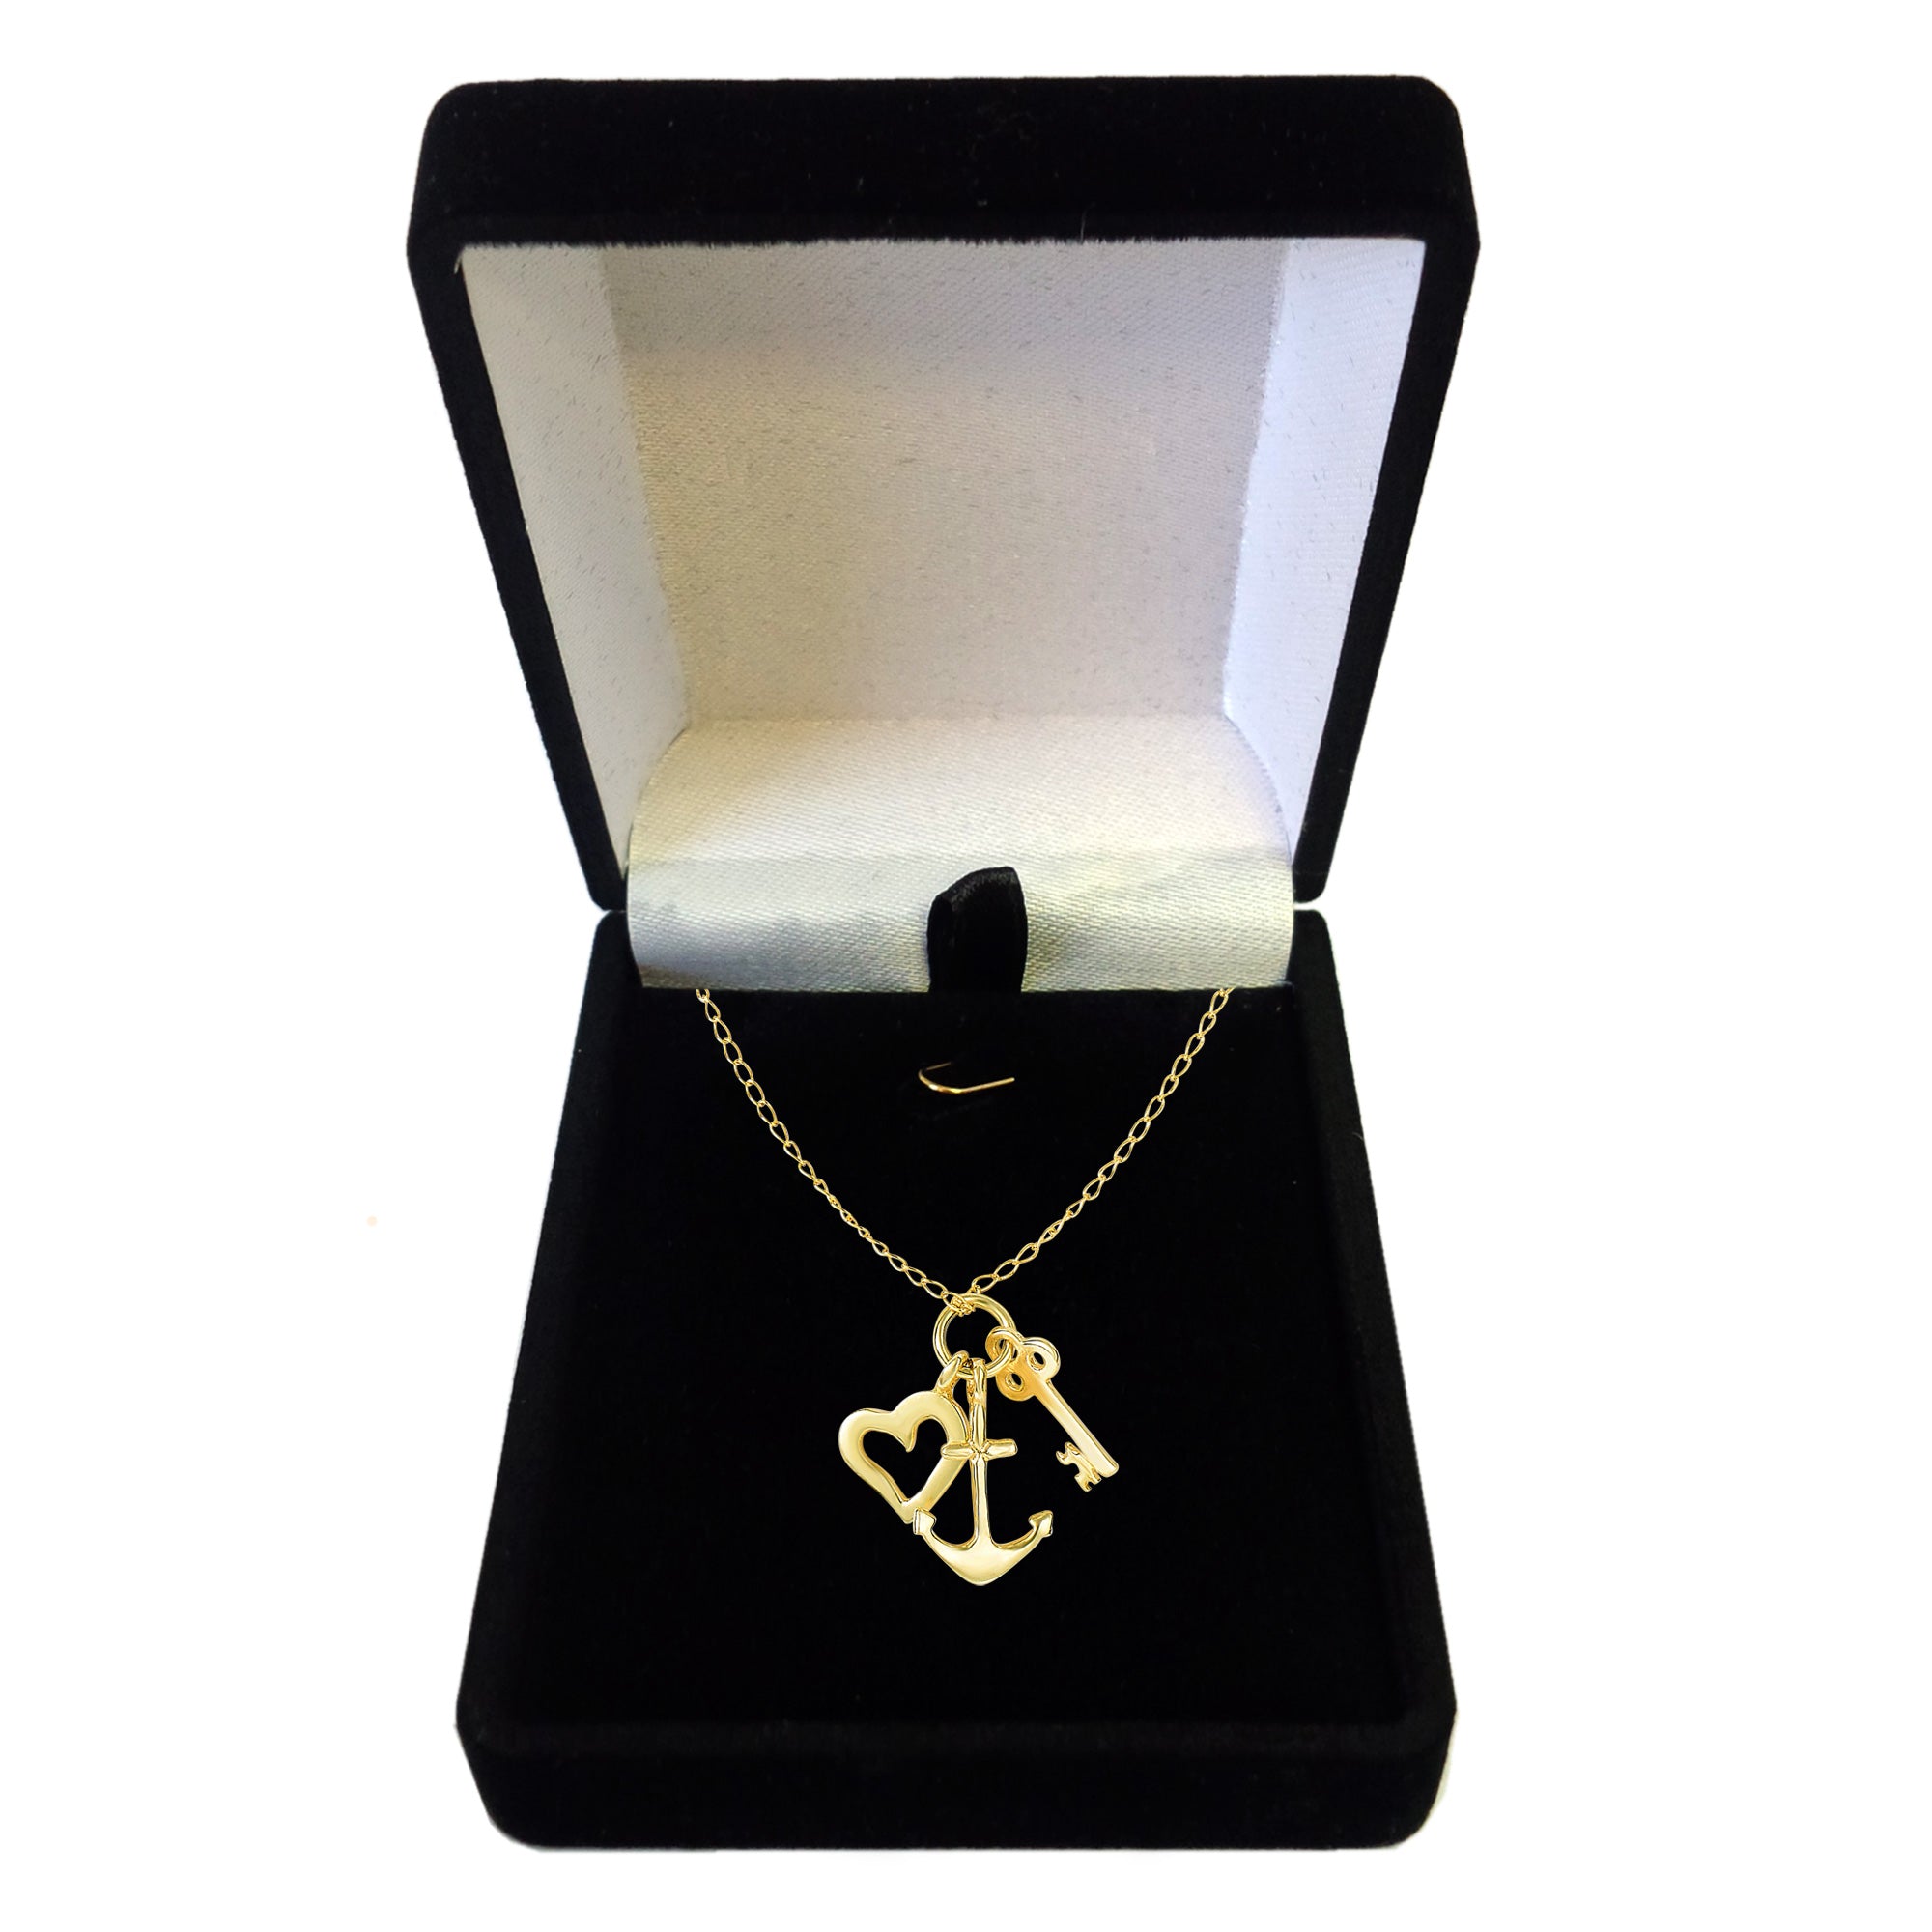 14k Yellow Gold Key Anchor And Heart Charms Necklace, 18"